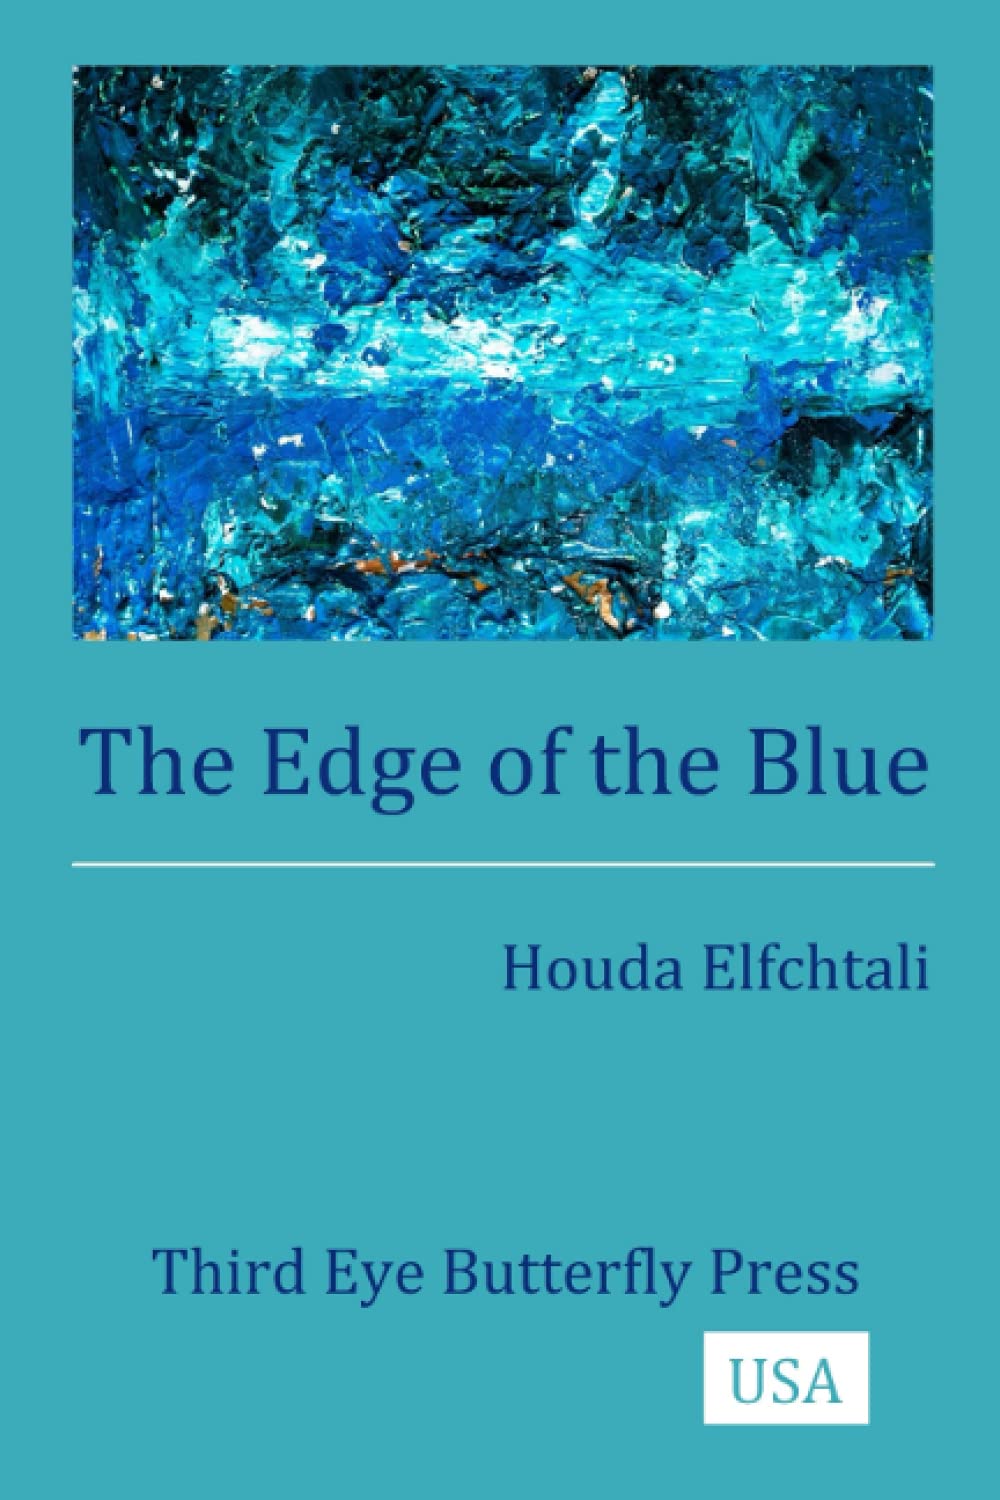 THE EDGE OF THE BLUE